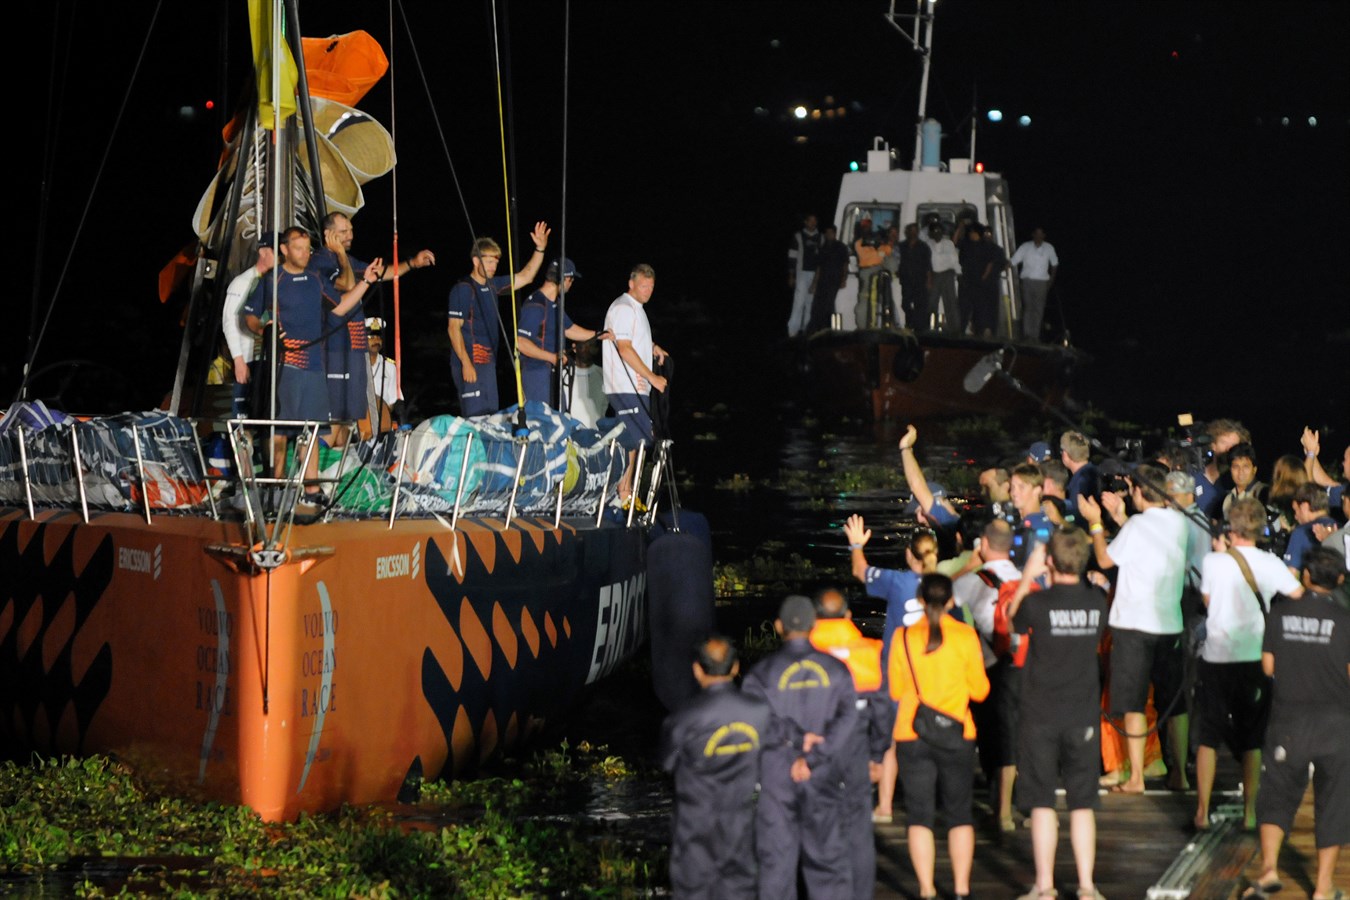 Ericsson 4, Skippered by Torben Grael, arrive in Cochin, India, to win the second leg of the Volvo Ocean Race 2008-09.